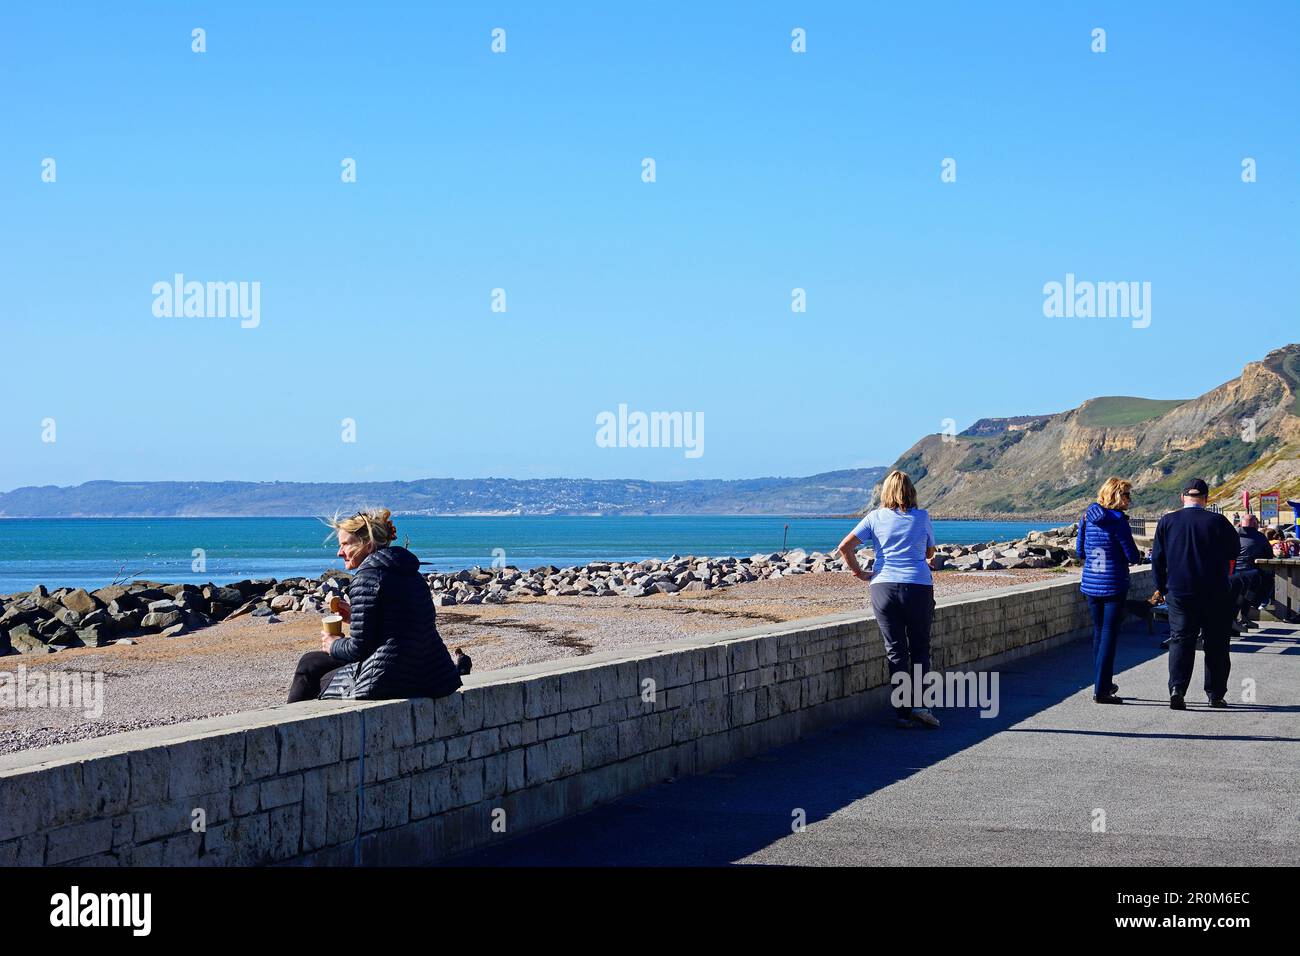 Tourists on the promenade with views of the beach and Jurassic Coast, West Bay, Dorset, UK, Europe. Stock Photo